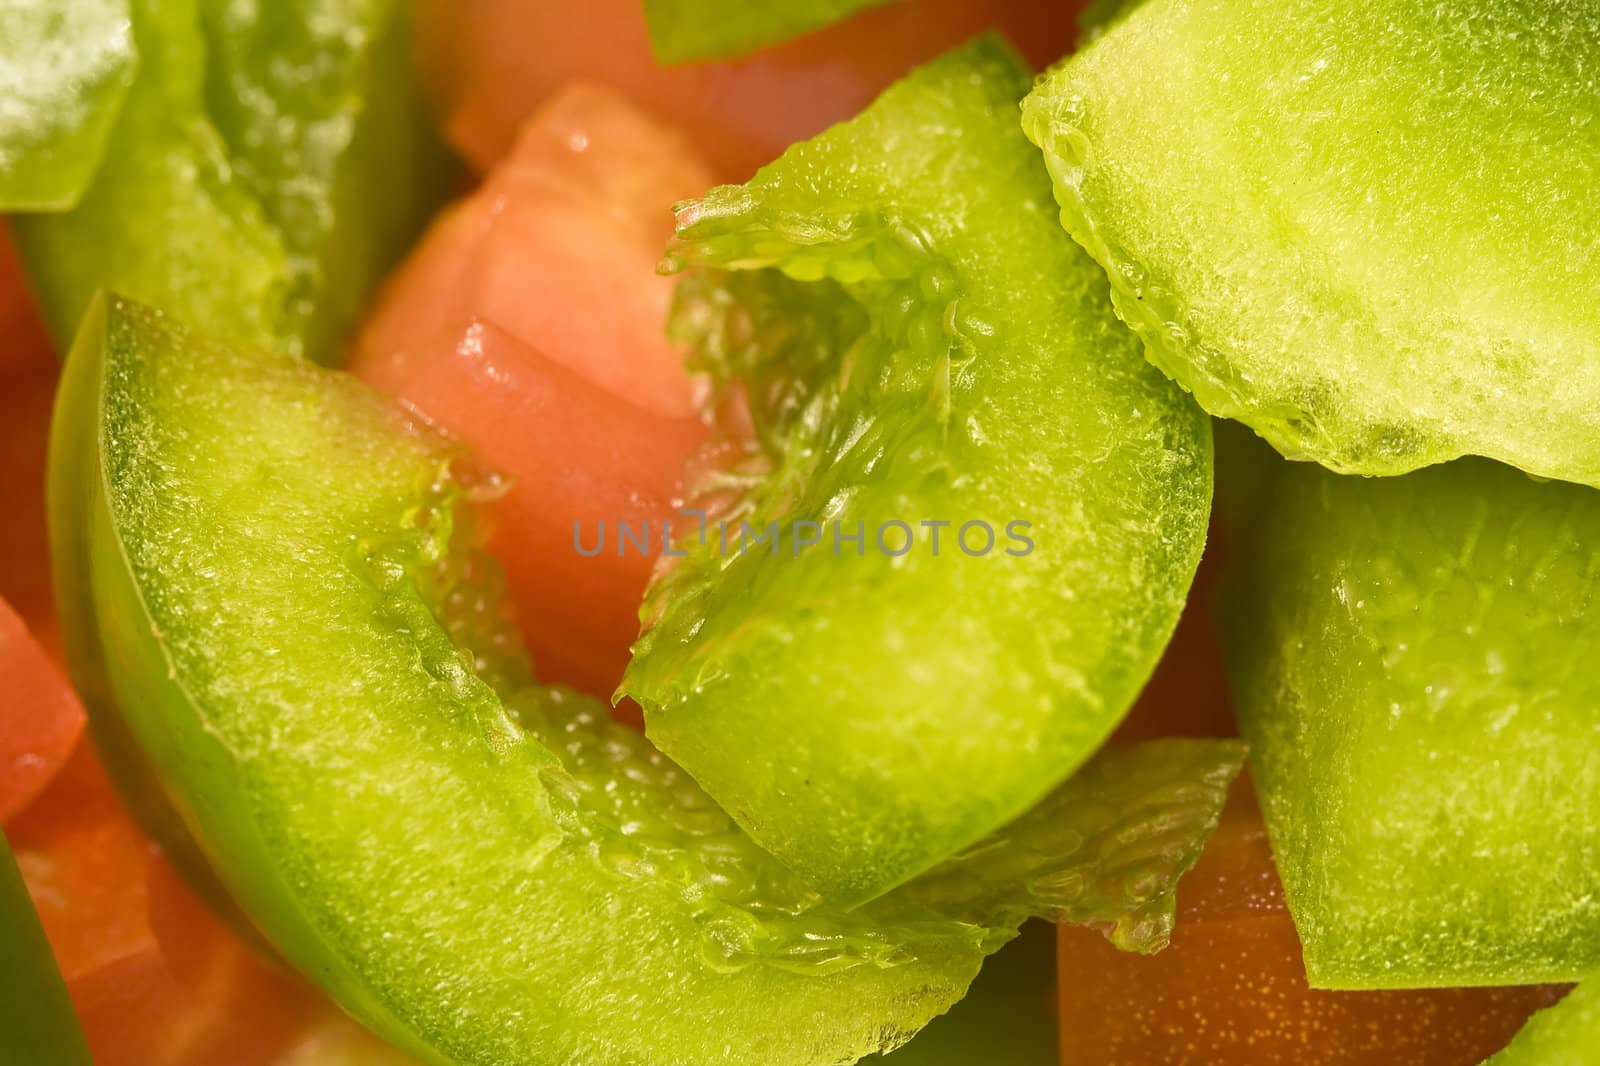 close up of red and green cut bell peppers